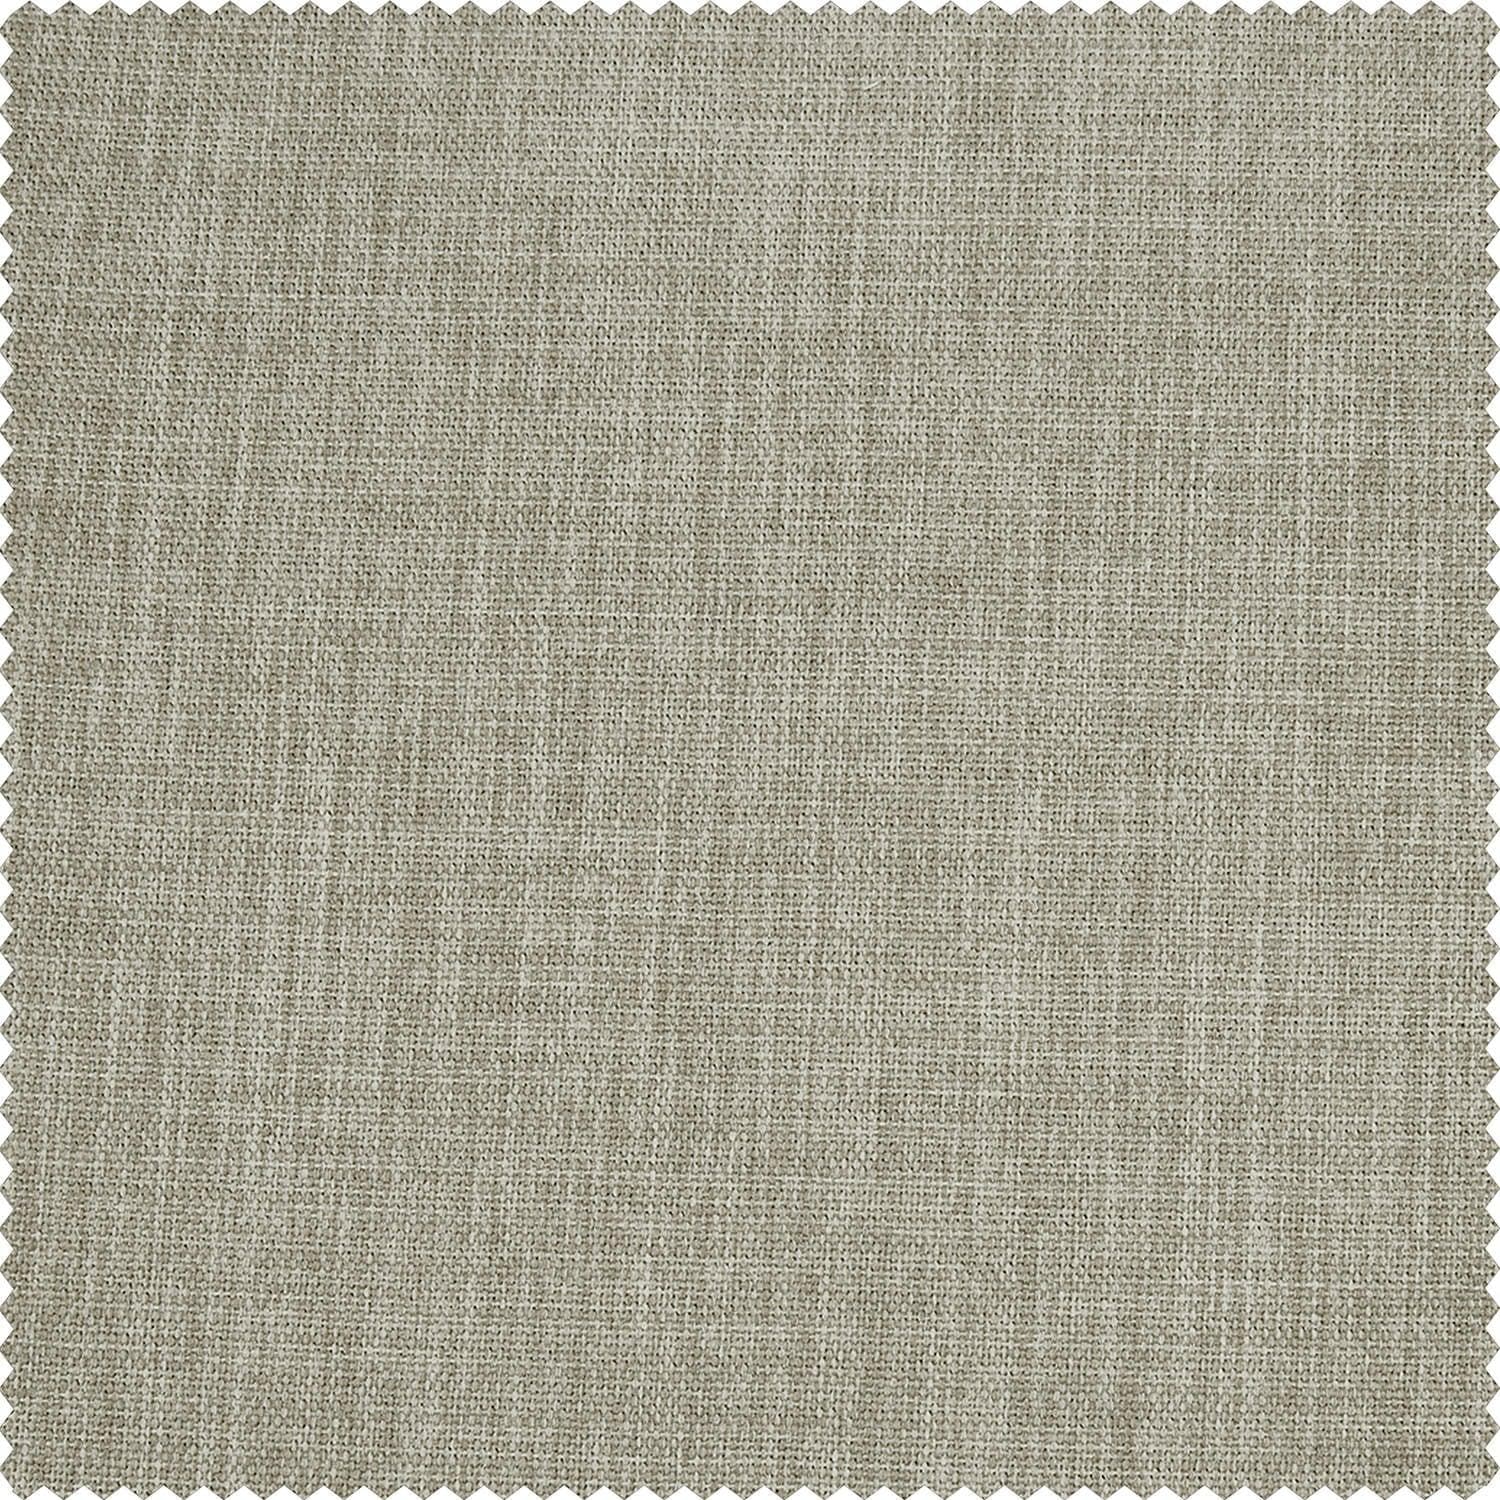 Oatmeal Textured Faux Linen Swatch